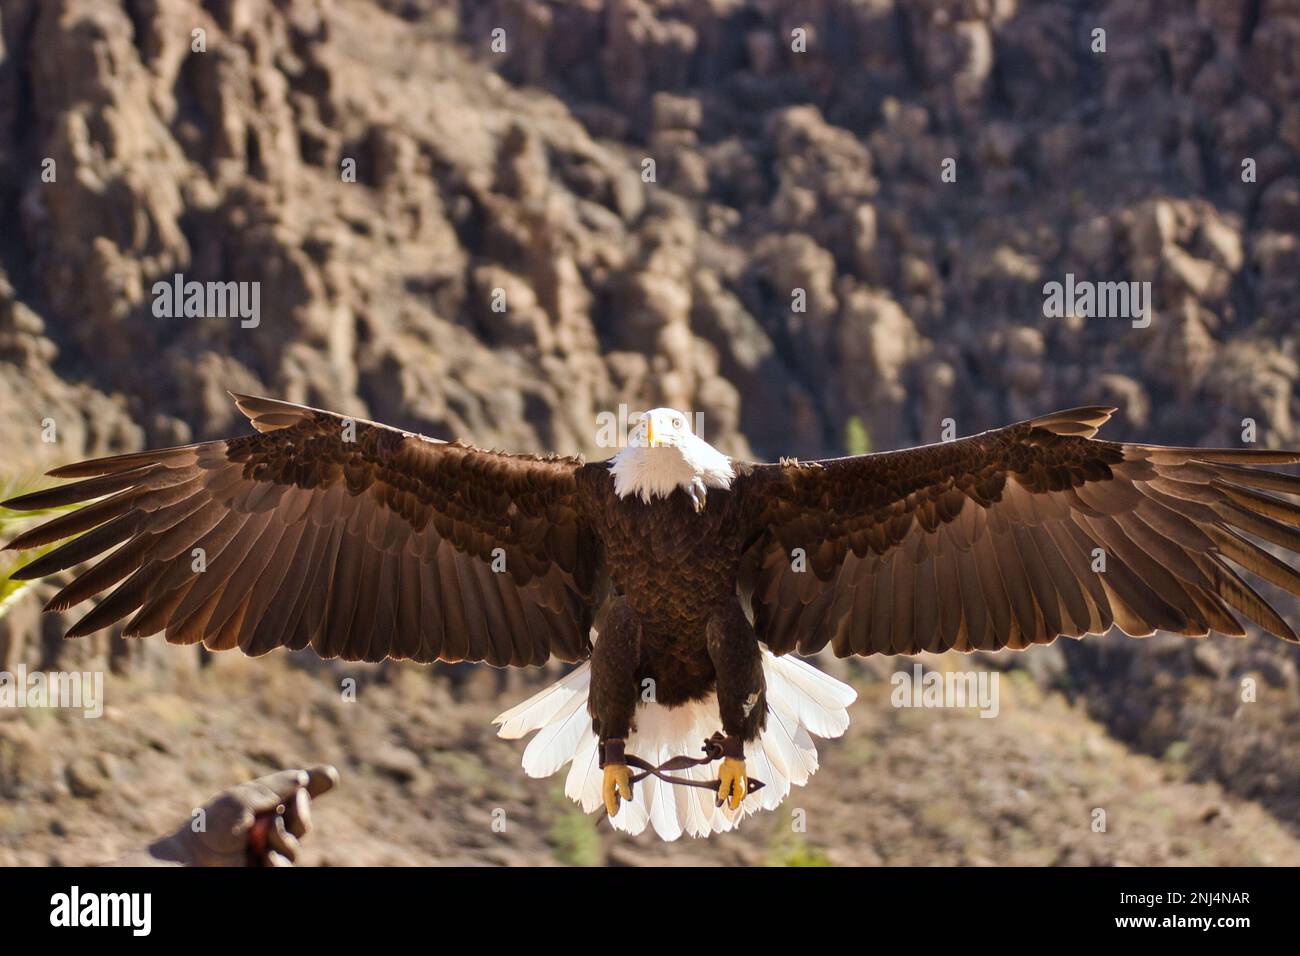 Full body shot of a white-tailed eagle in flight, with a rocky mountain in the background. Stock Photo